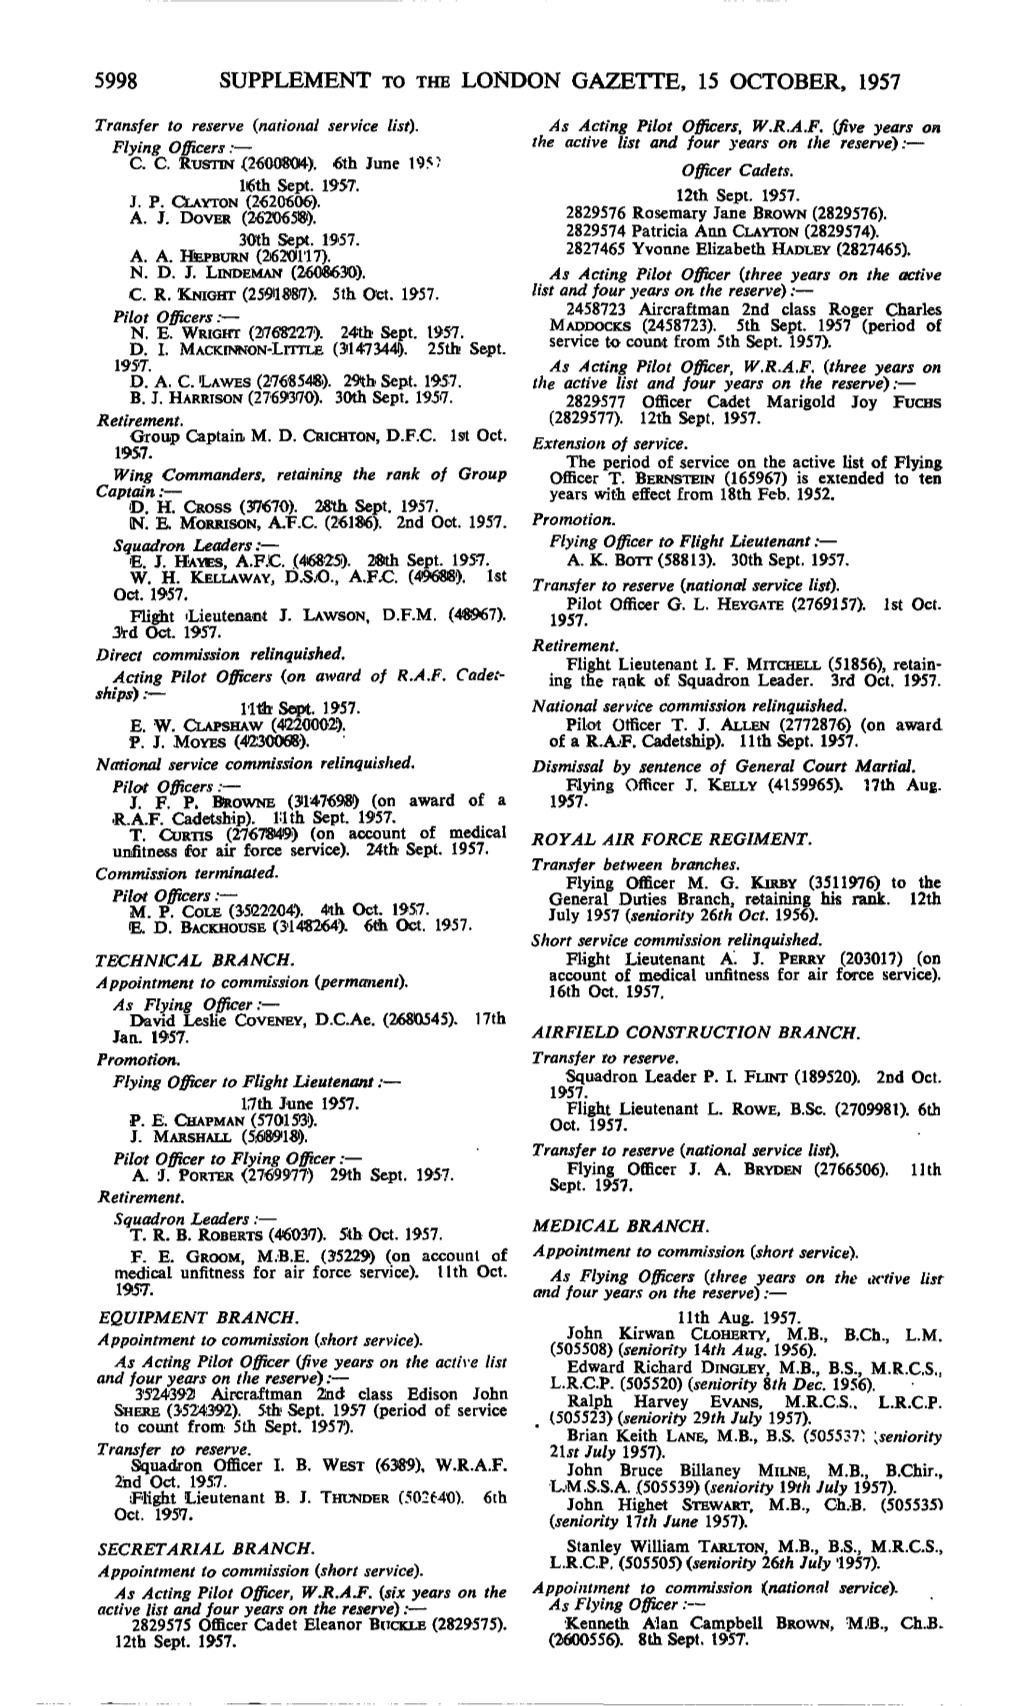 5998 Supplement to the London Gazette, 15 October, 1957